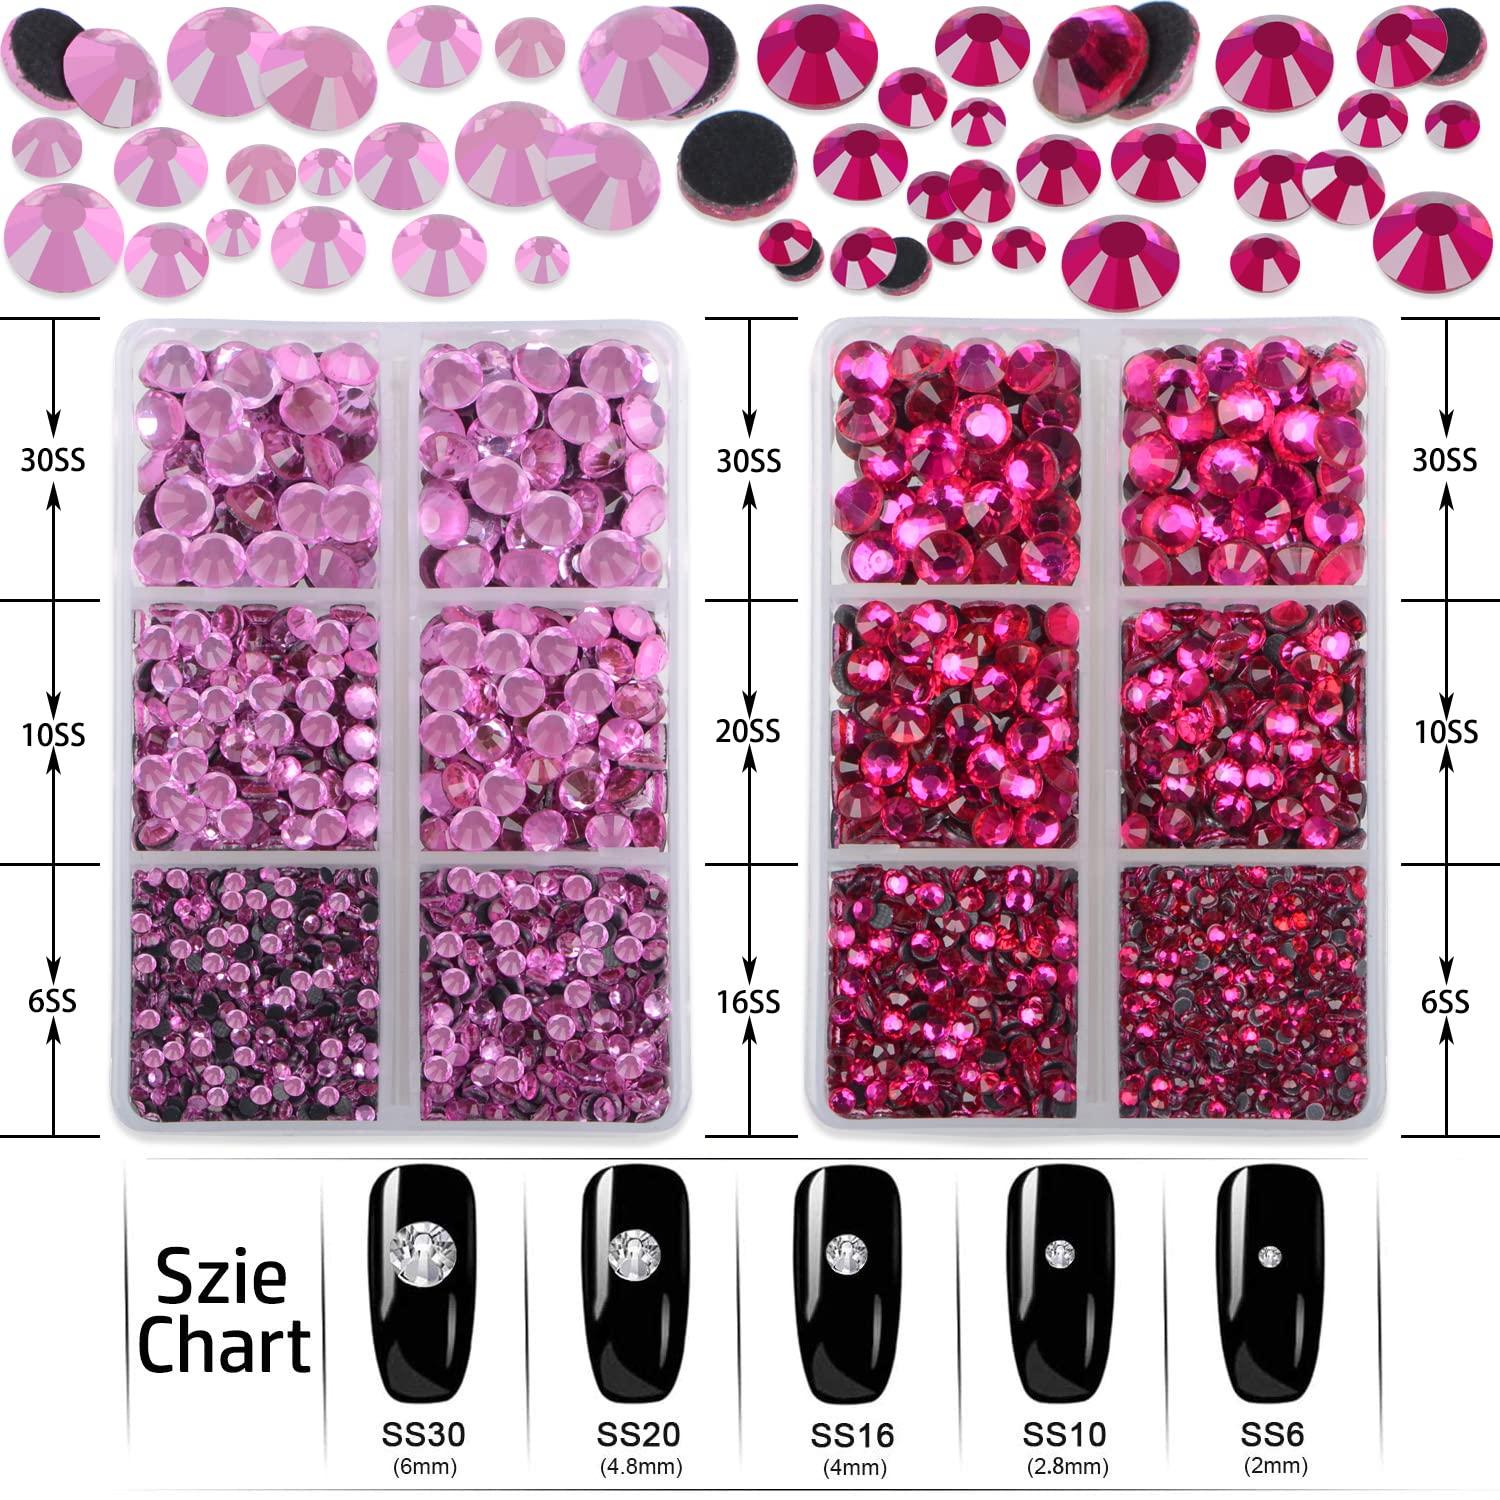 LPBeads Lpbeads 6400 Pieces Hotfix Rhinestones Transparent Black Flat Back  5 Mixed Sizes Crystal Round Glass Gems With Tweezers And Pick